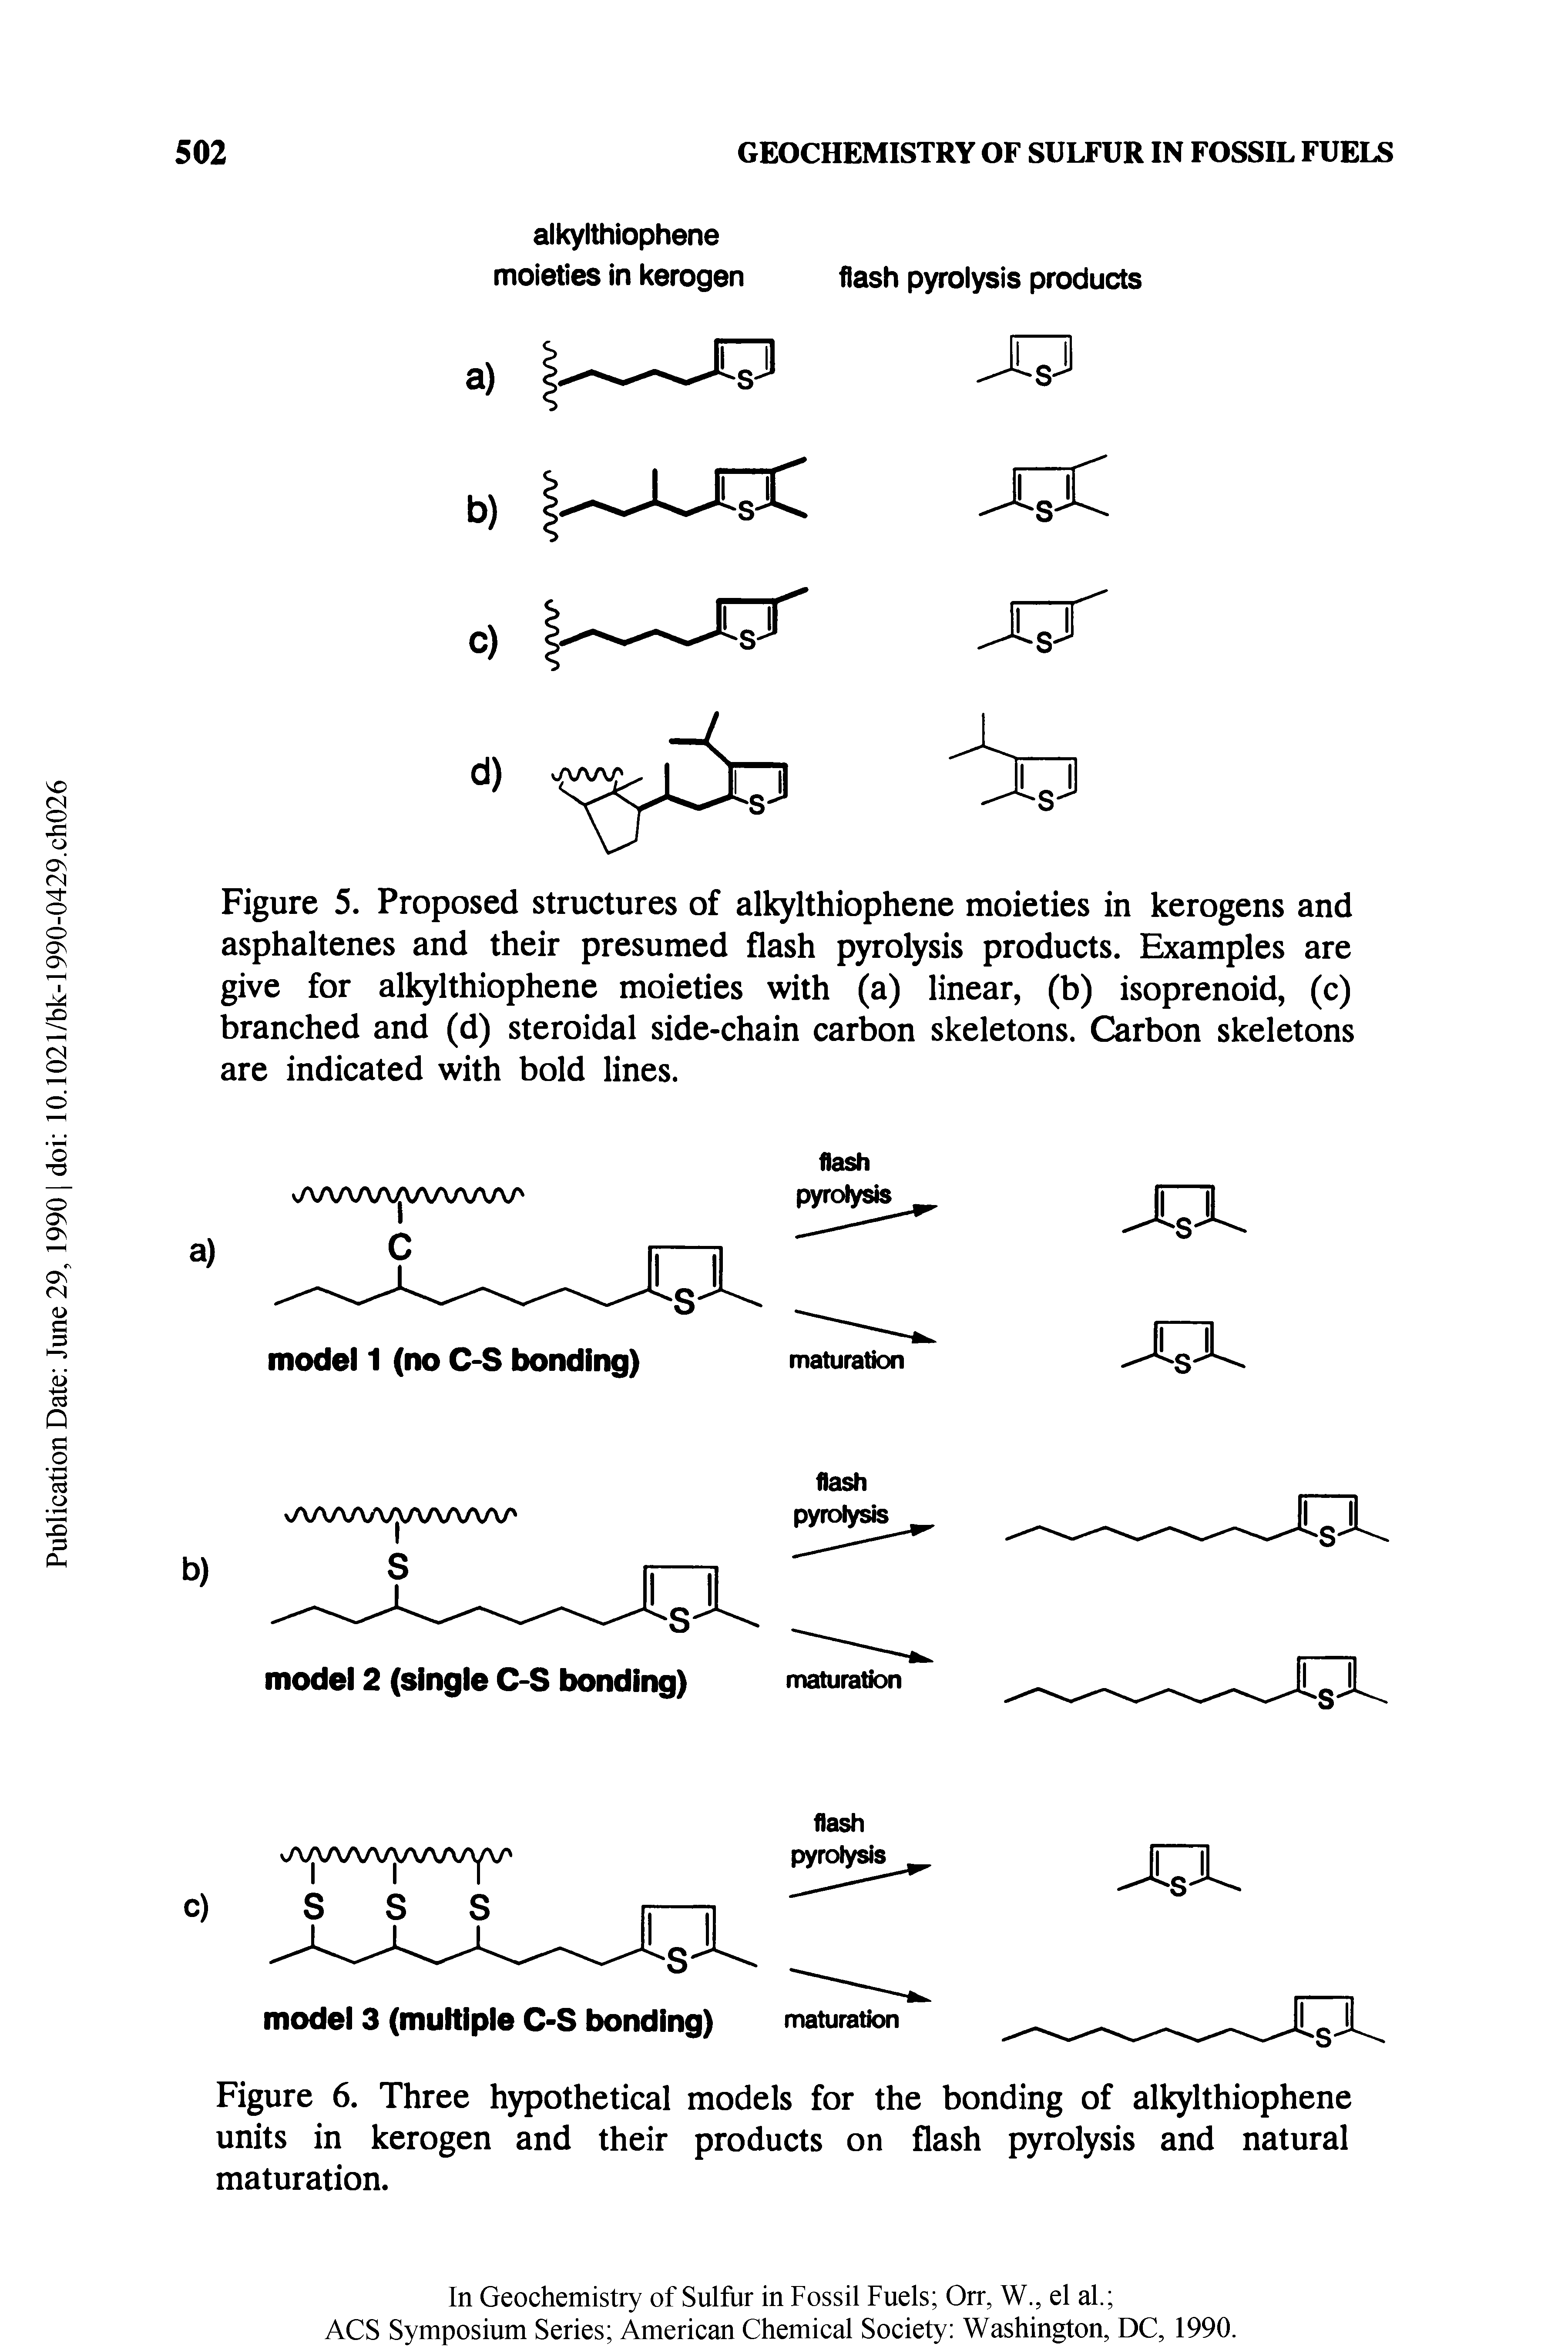 Figure 6. Three hypothetical models for the bonding of alkylthiophene units in kerogen and their products on flash pyrolysis and natural maturation.